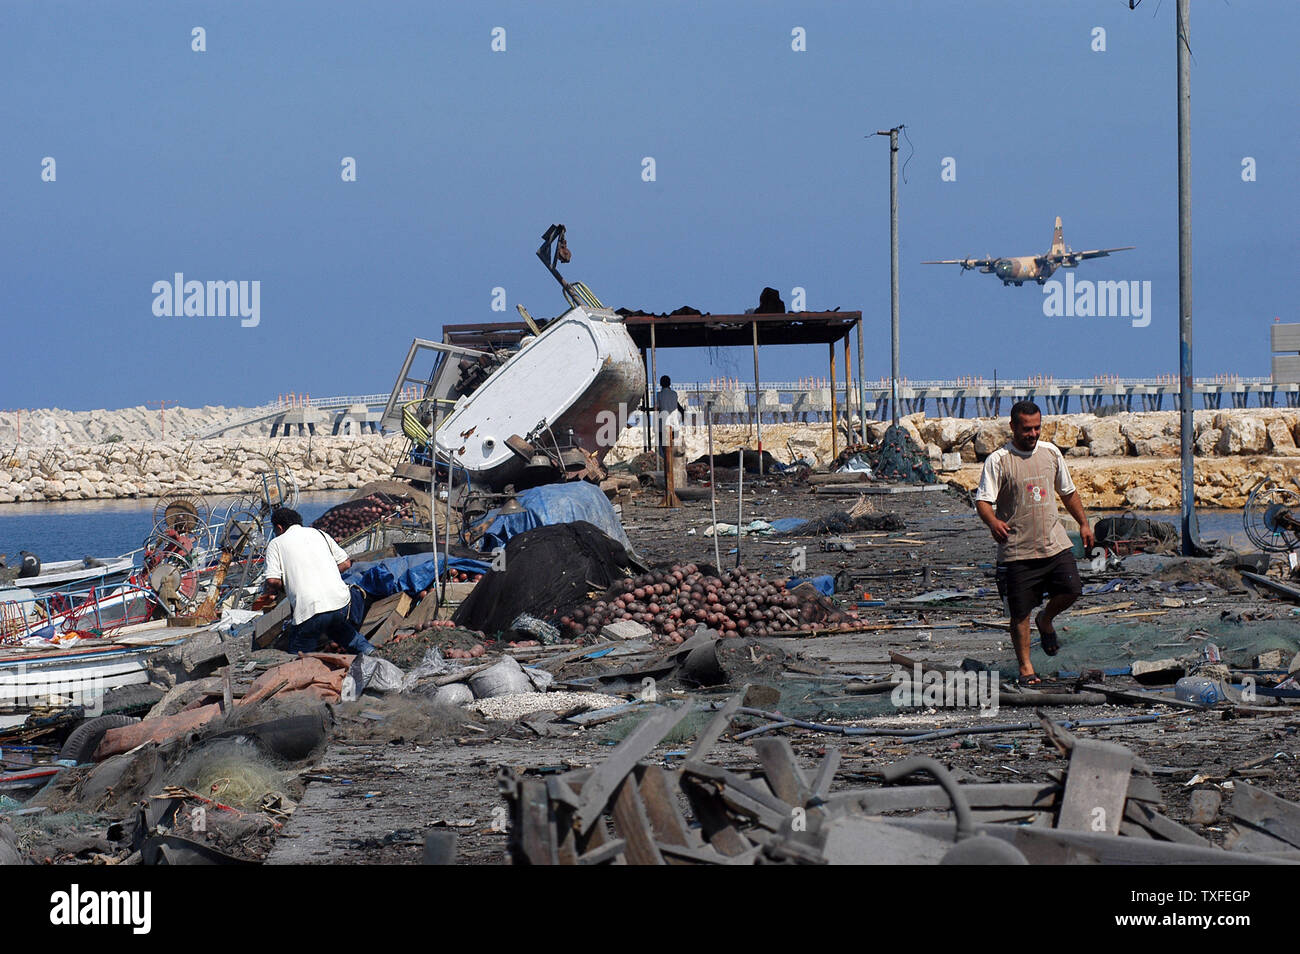 A day after Israelis bombed a small fishing port in Ouzai, in Beirut's southern suburbs, fishermen return to see what they can salvage from their boats on August 5, 2006. The Israeli Air Force continues to target what's left of Beirut's southern suburbs three weeks into the their air campaign. Lebanese officials estimate over 650 Lebanese, mostly civilians, have died since July 12, 2006.  (UPI Photo/ Norbert Schiller) Stock Photo